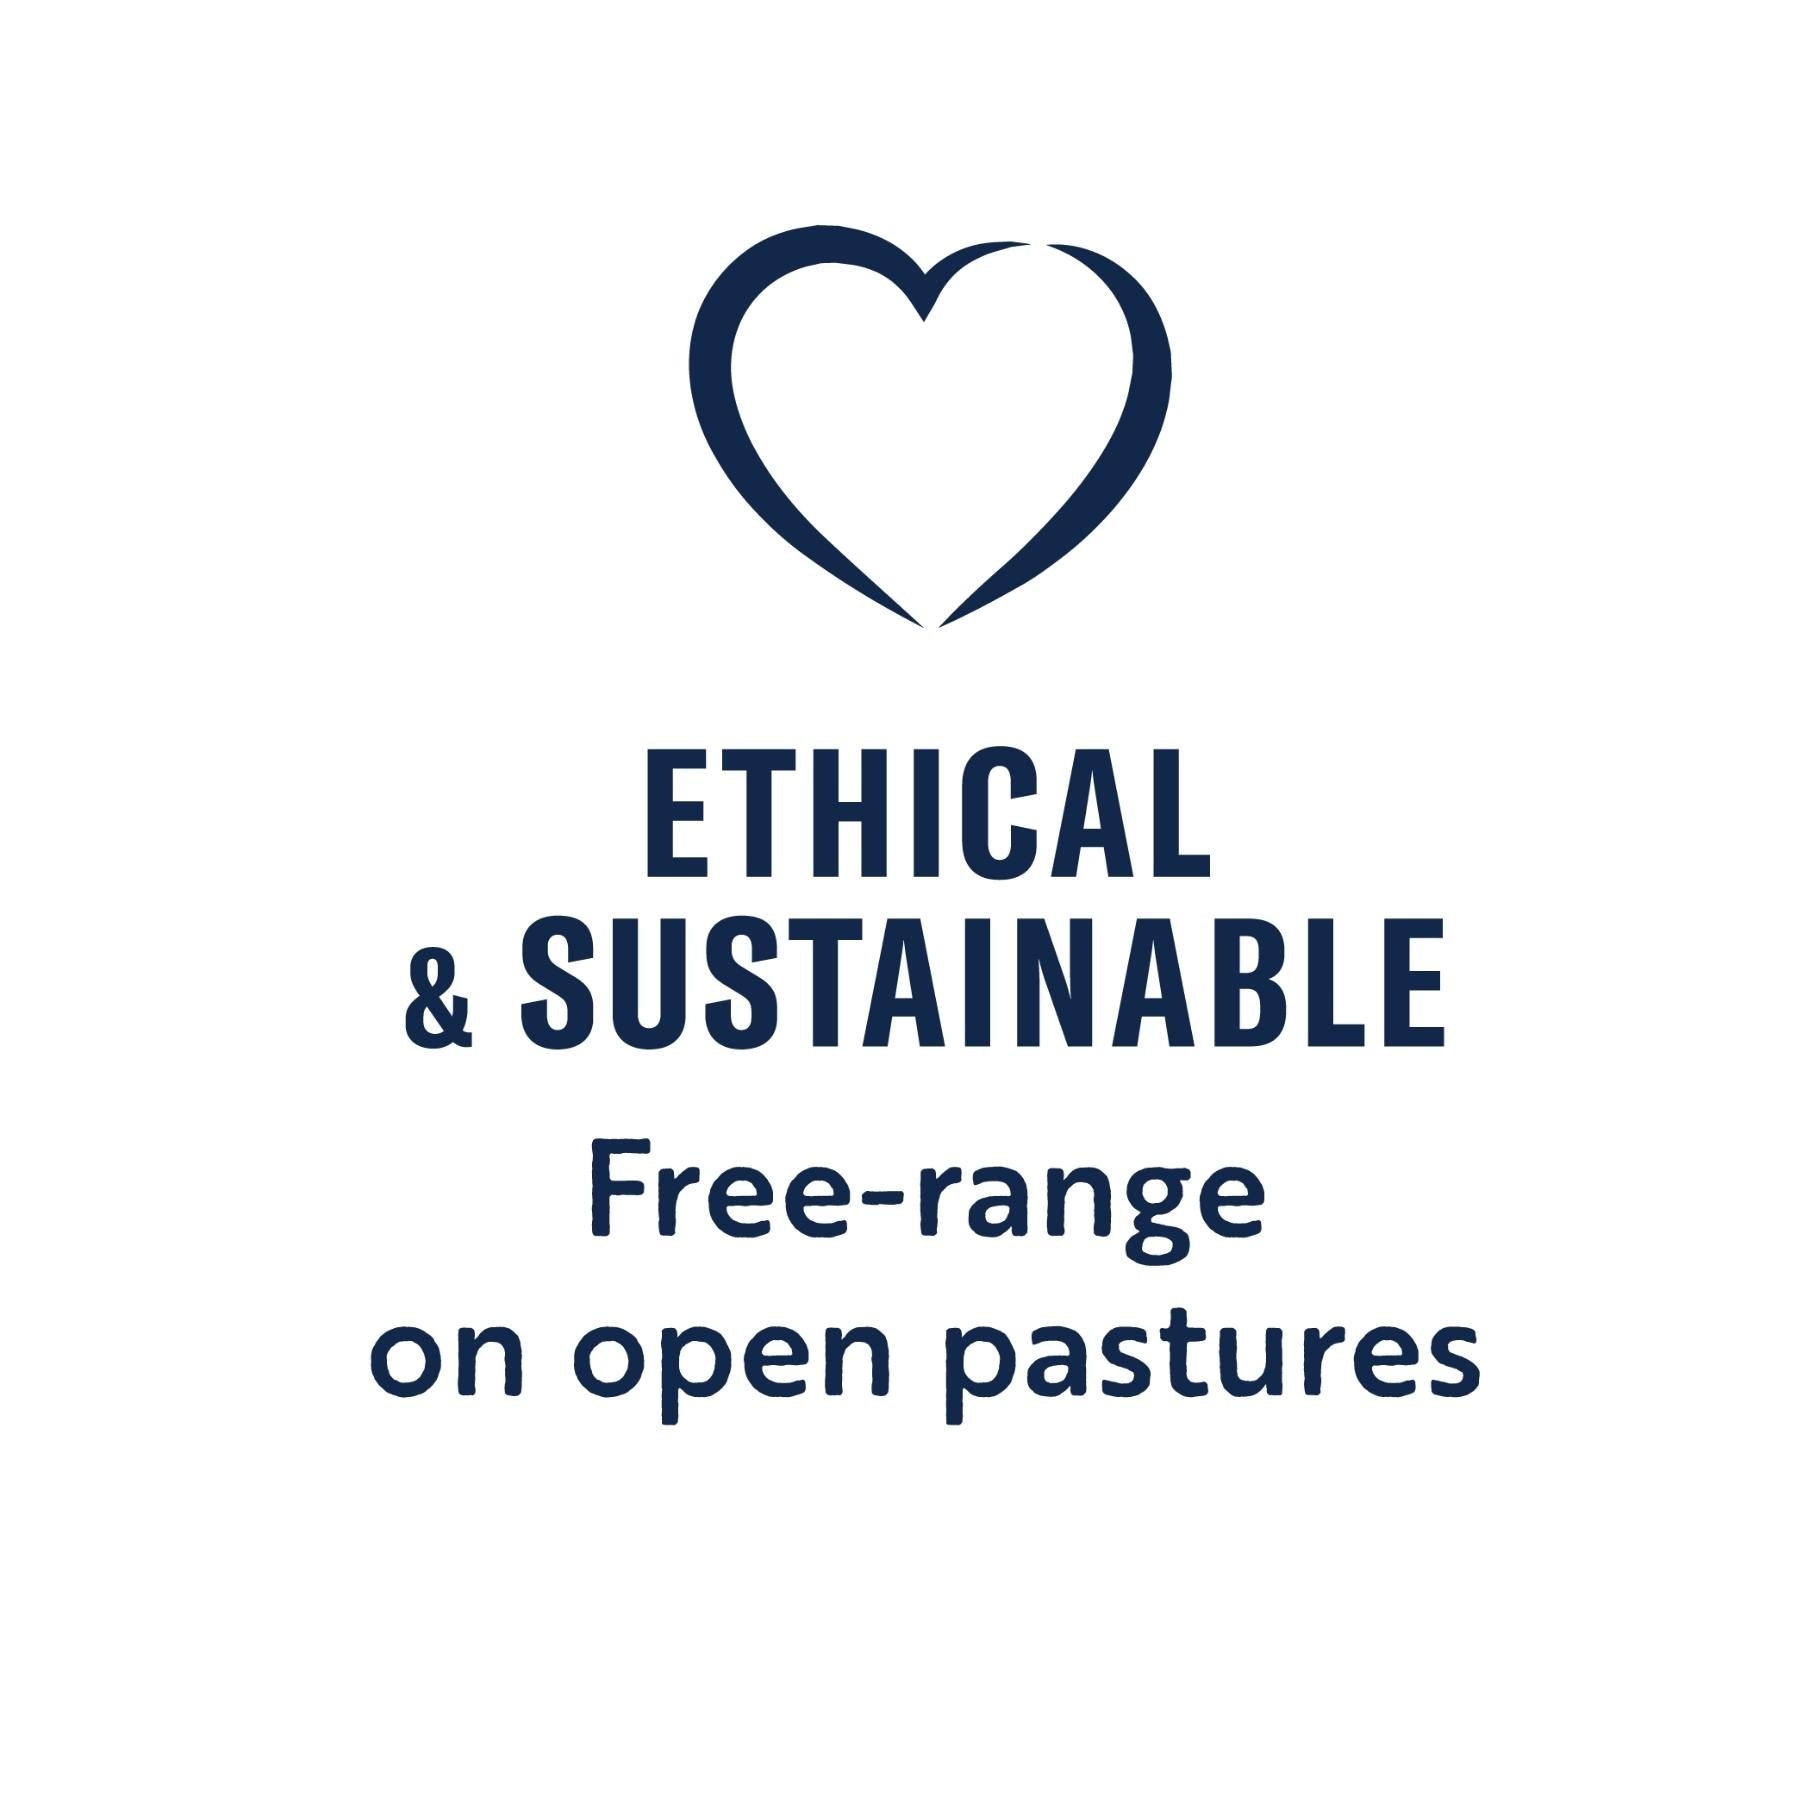 Ethical and Sustainable, Free-range on open pastures.